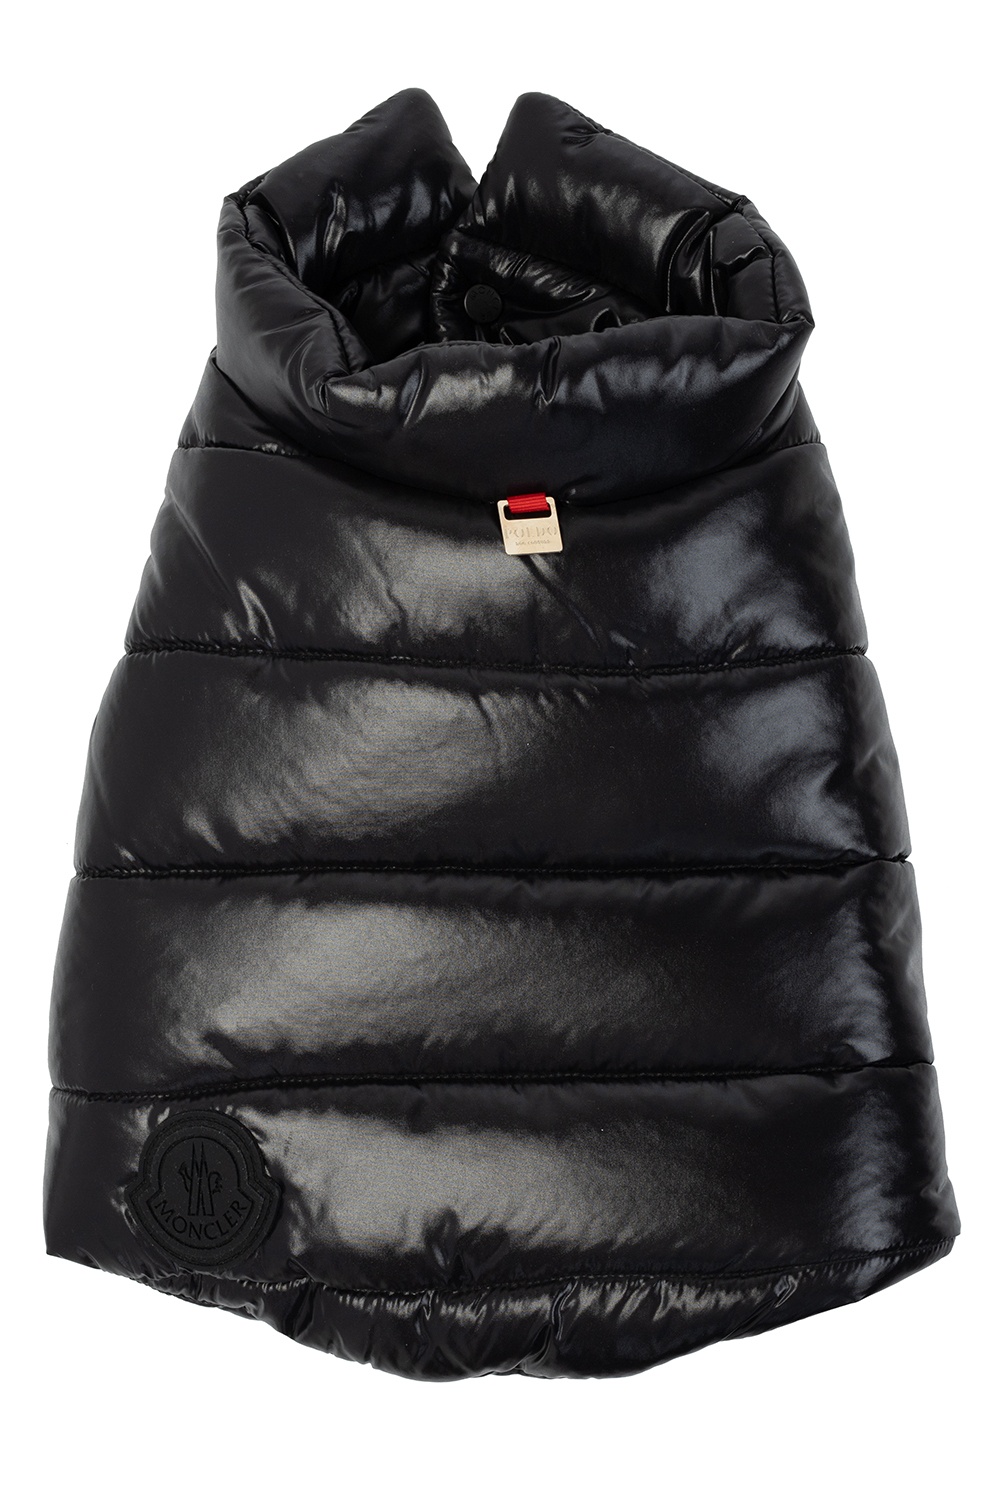 Moncler Genius Gilrs clothes 4-14 year